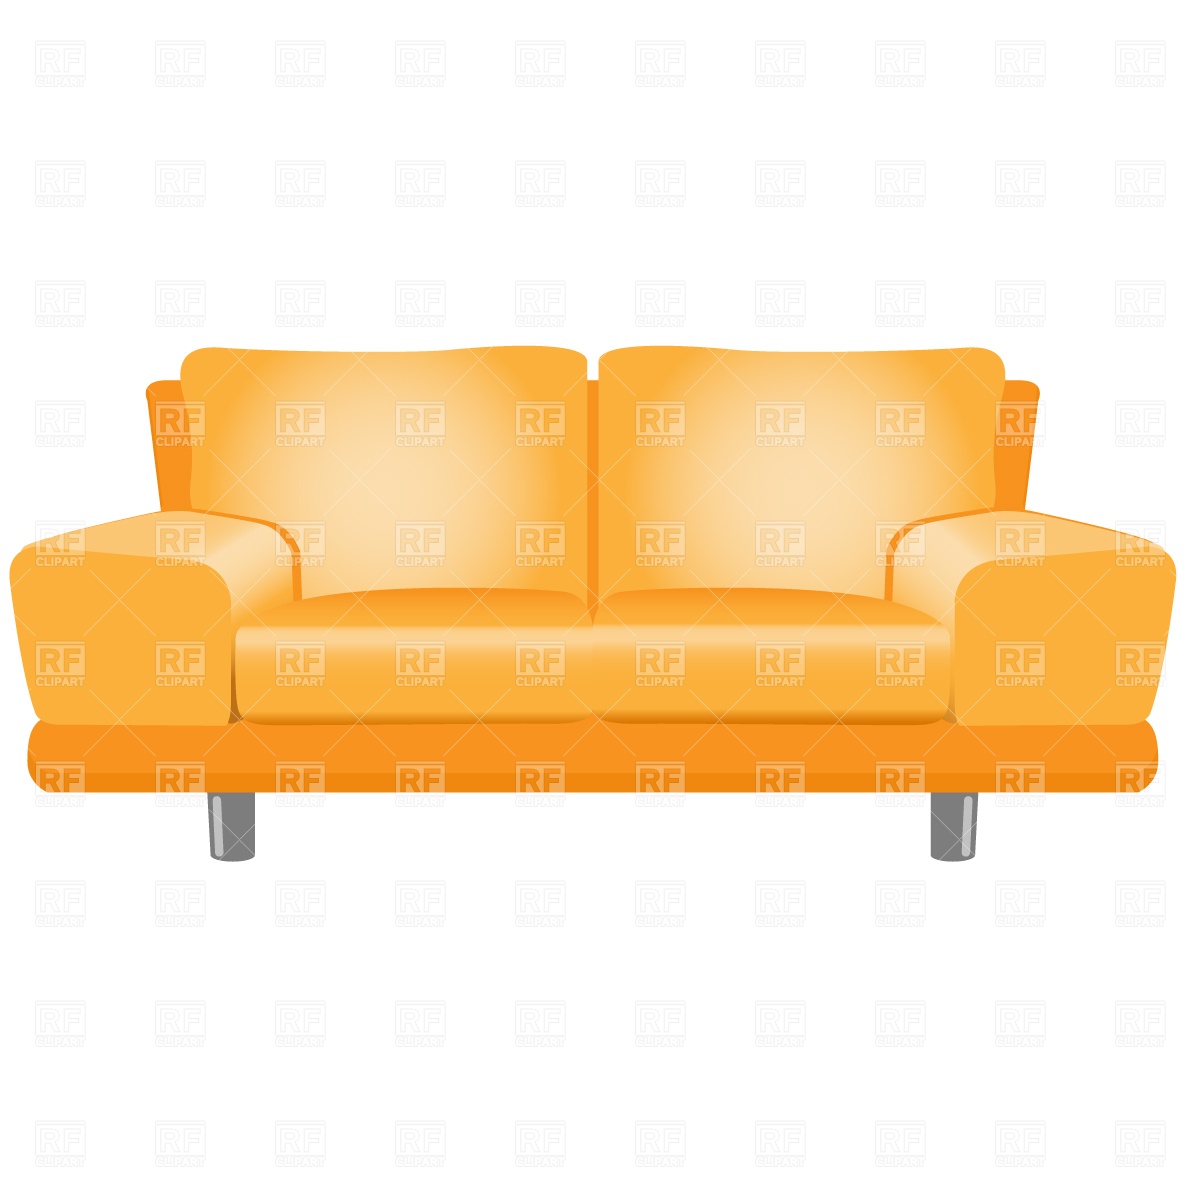 Clipart Catalog   Objects   Modern Sofa Download Royalty Free Vector